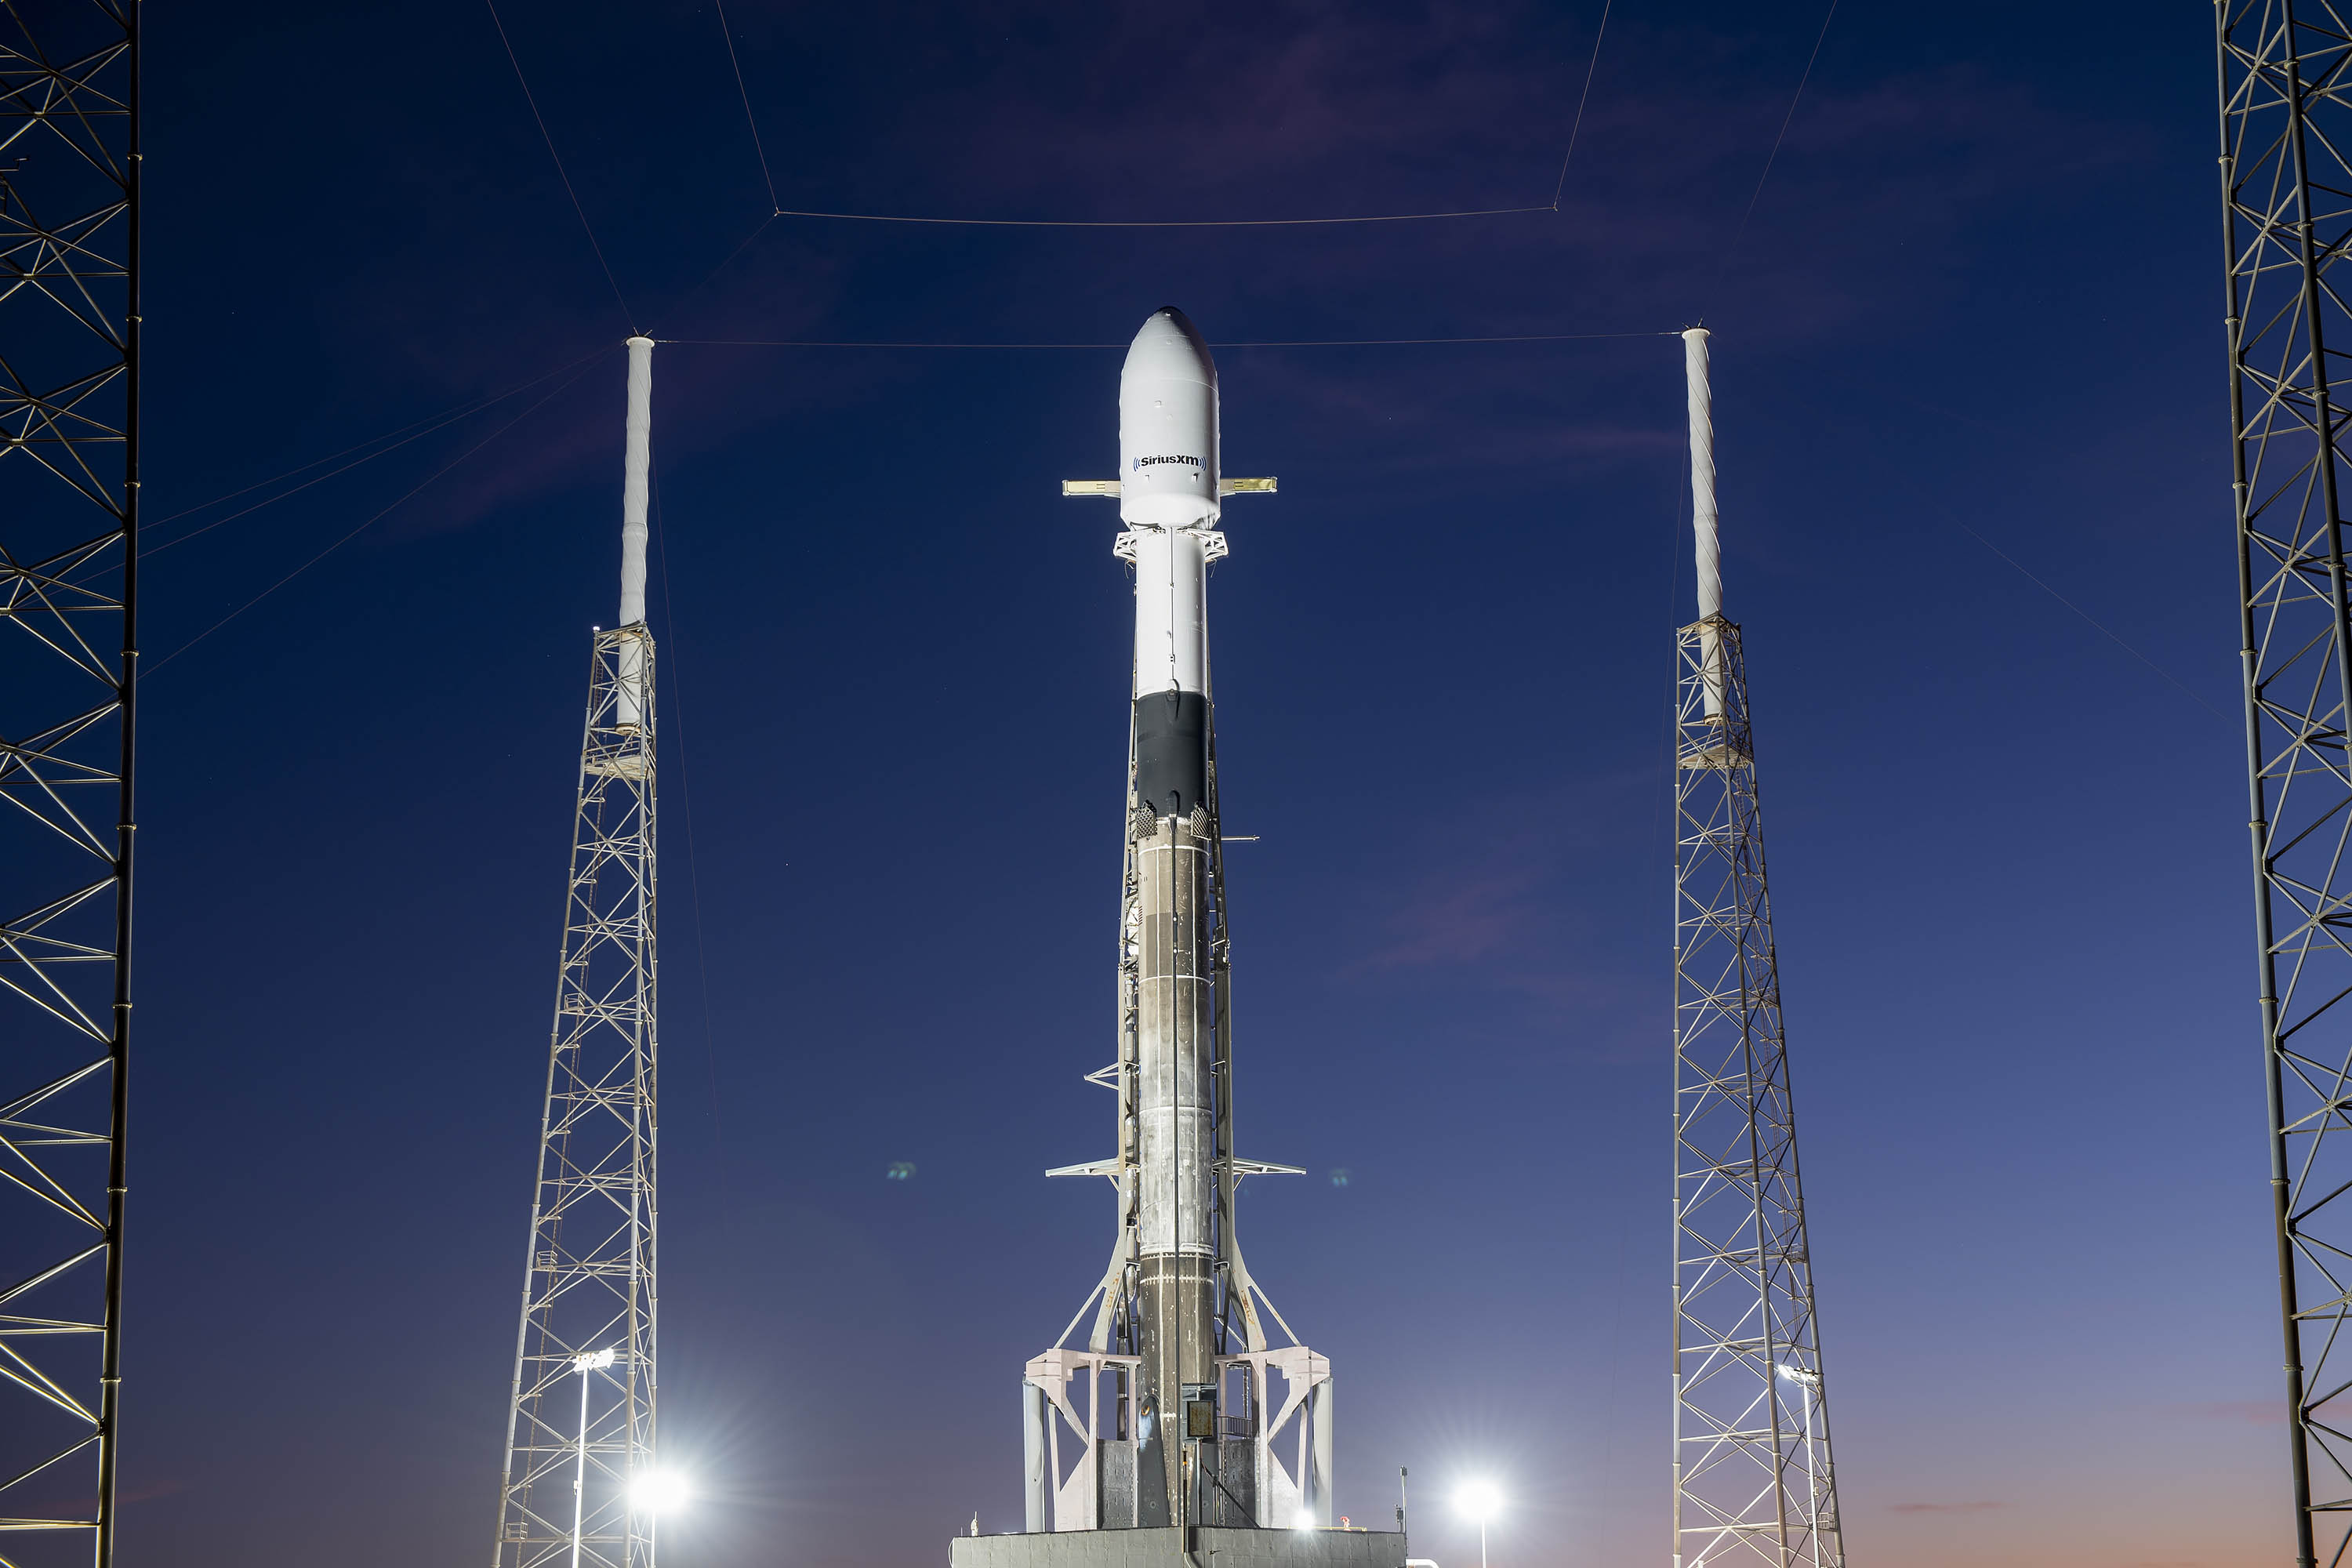 spacex falcon 9 rocket launch tonight